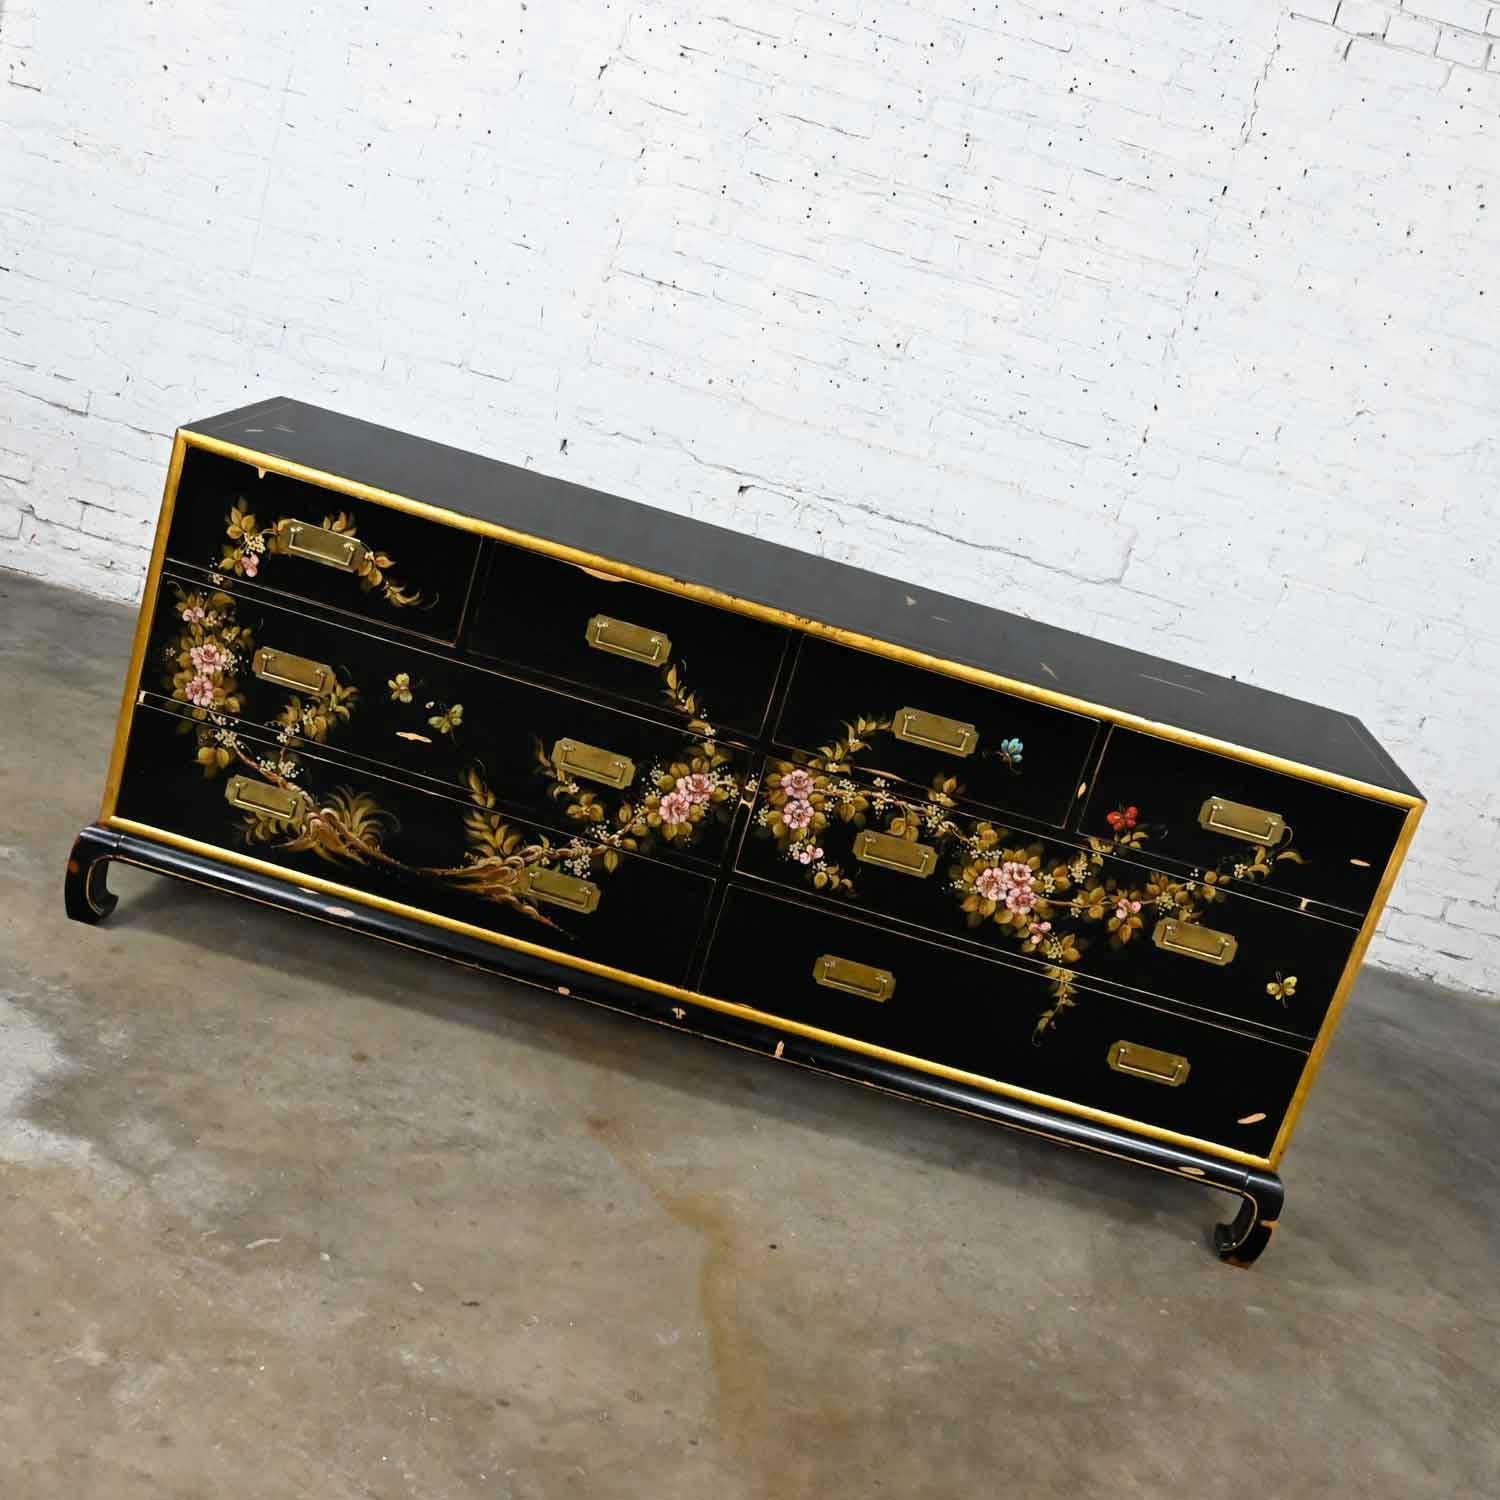 Gorgeous vintage Union National Furniture Chinoiserie chow leg Ming style dresser black with tole painted floral design signed Dimas, distressed patina painted finish, and brass pulls. Beautiful condition, keeping in mind that this is vintage and